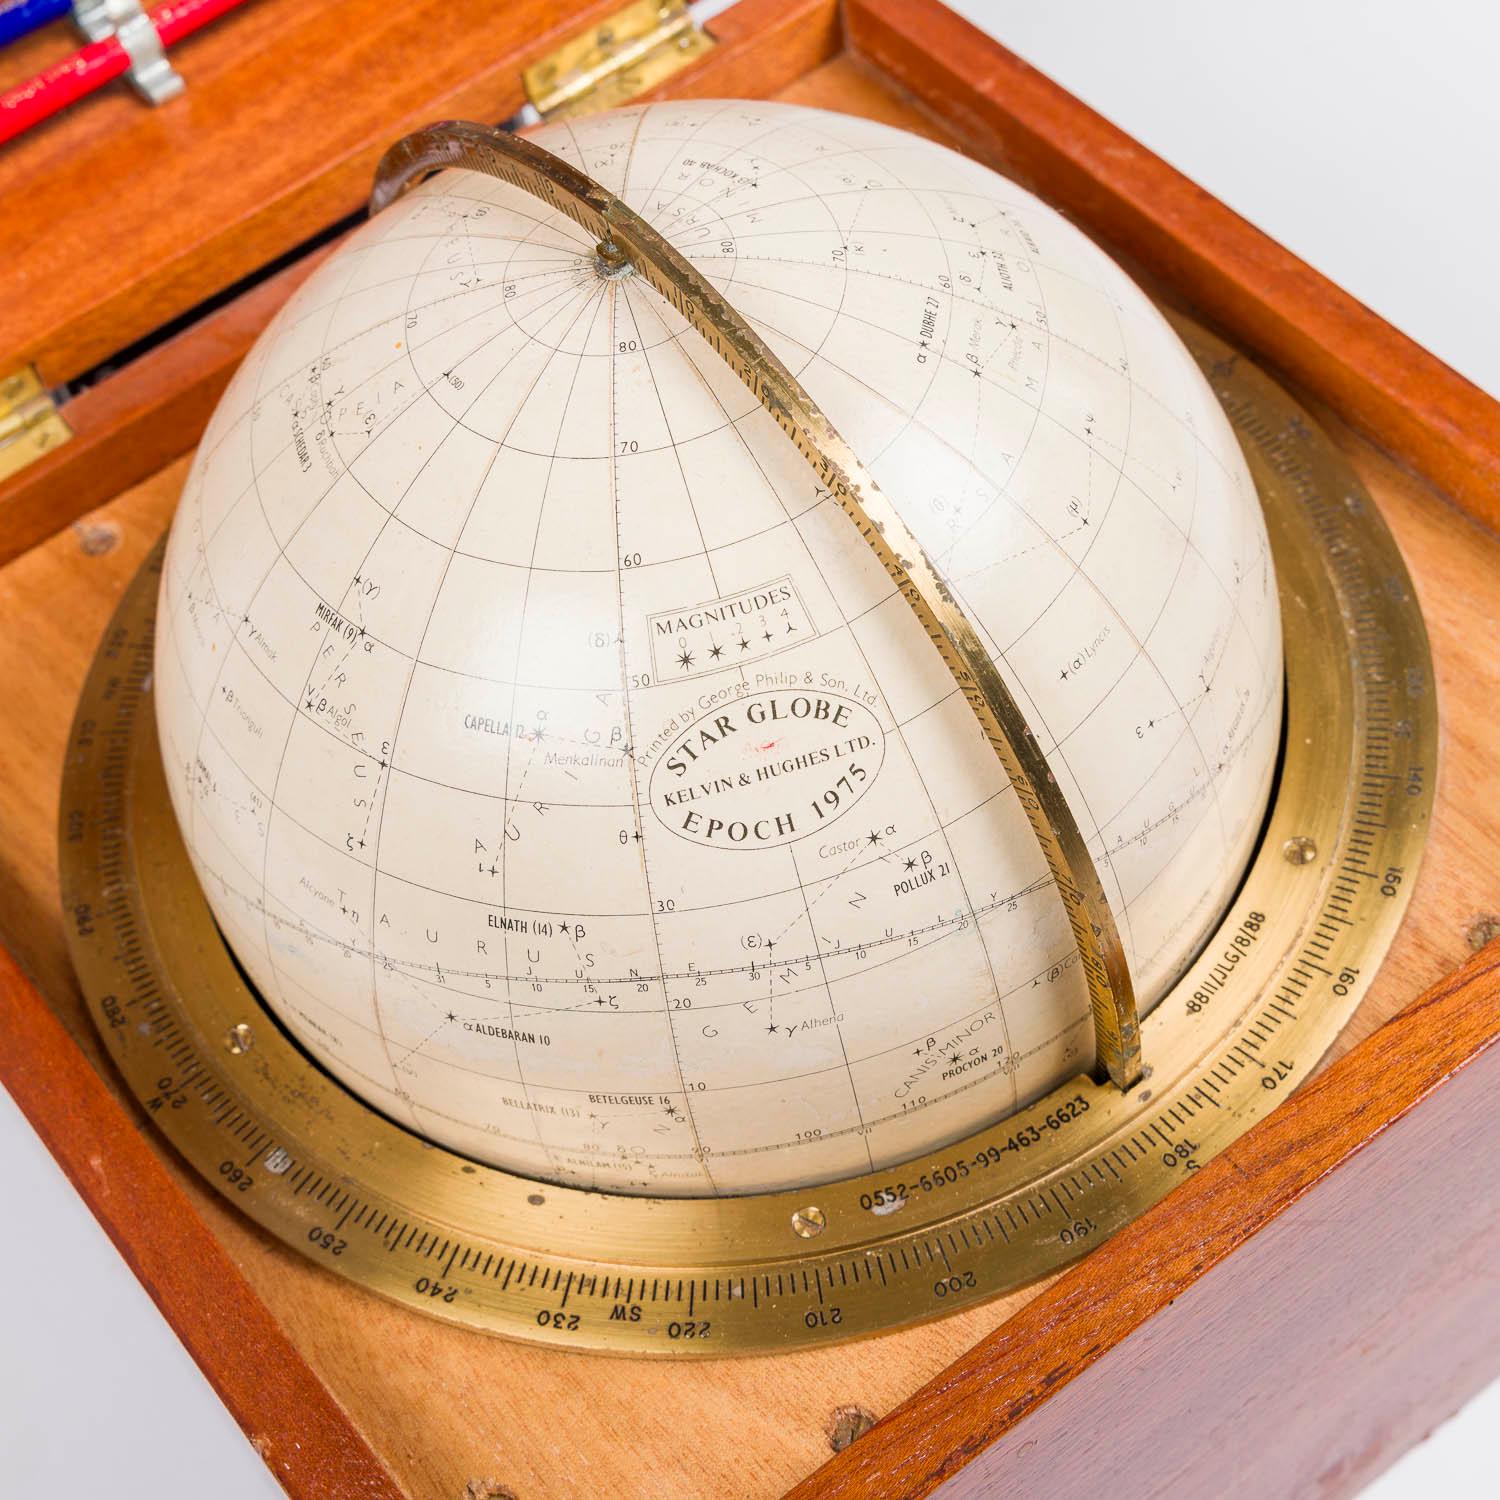 20th Century Celestial globe by Kelvin & Hughes, in original case with accessories   For Sale